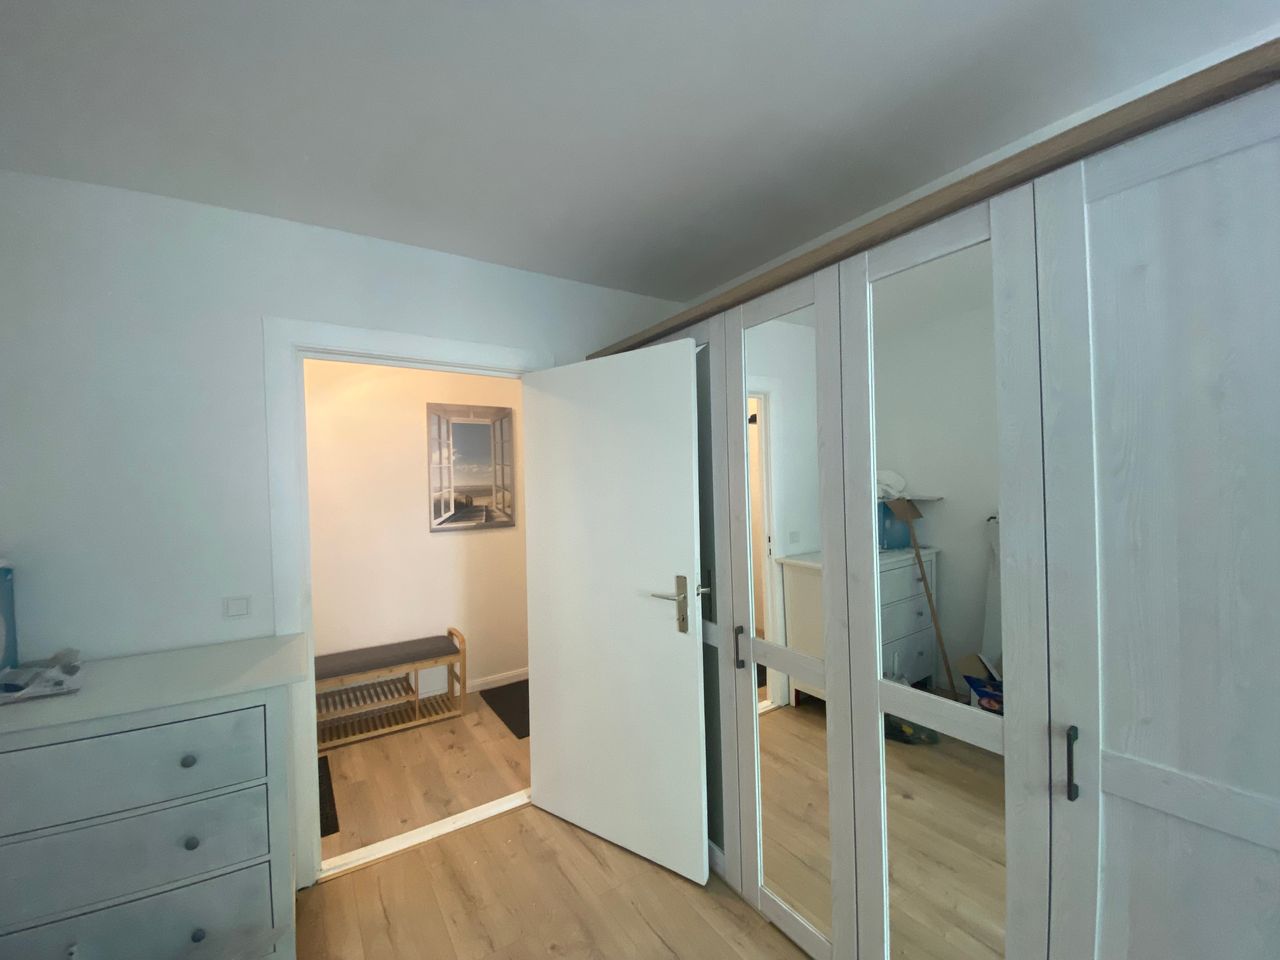 Brand new renovated apartment in sought after Berlin location.